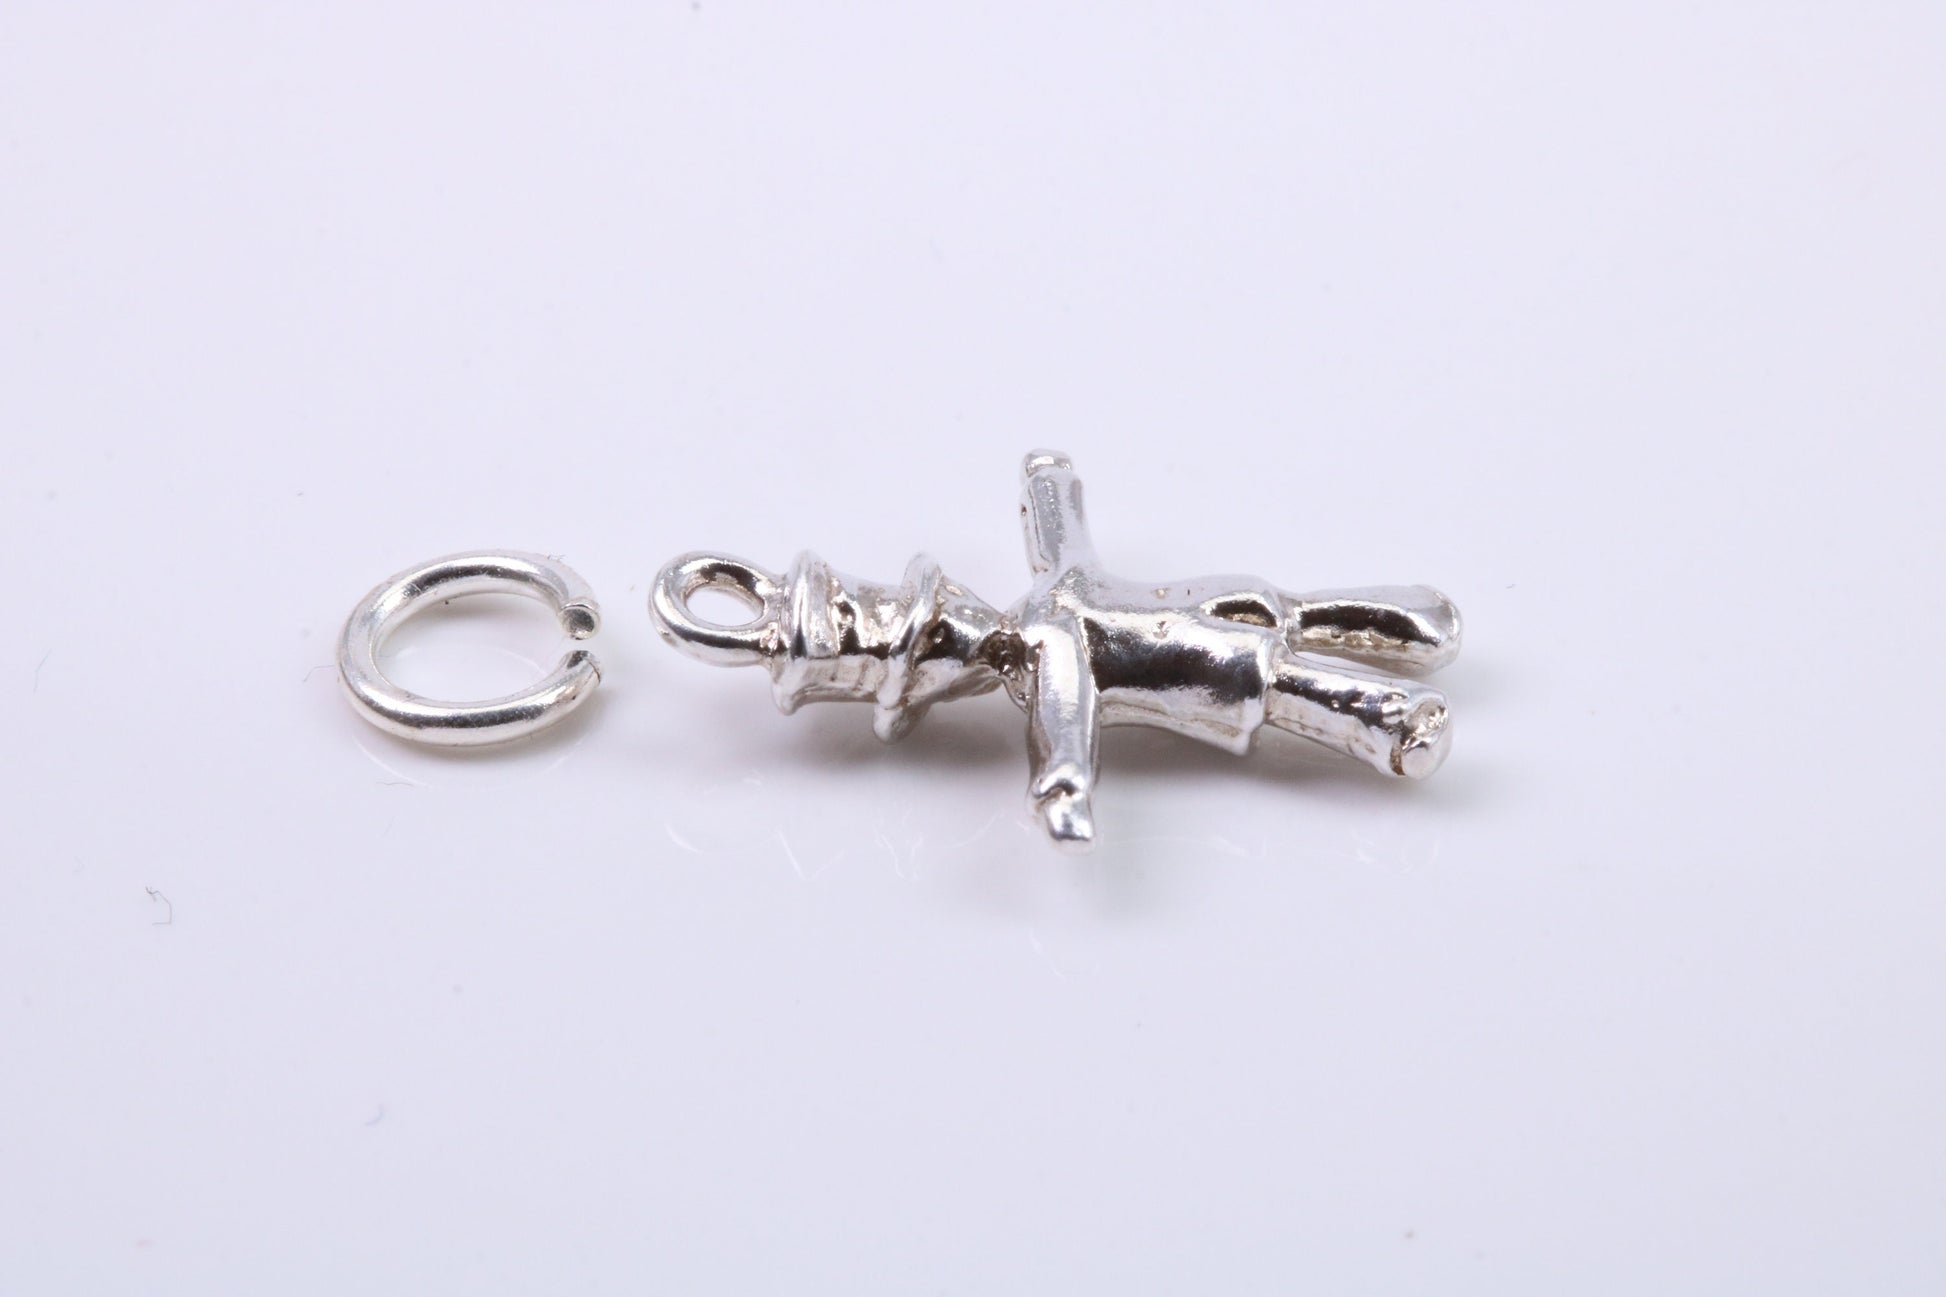 Scarecrow Charm, Traditional Charm, Made from Solid 925 Grade Sterling Silver, Complete with Attachment Link